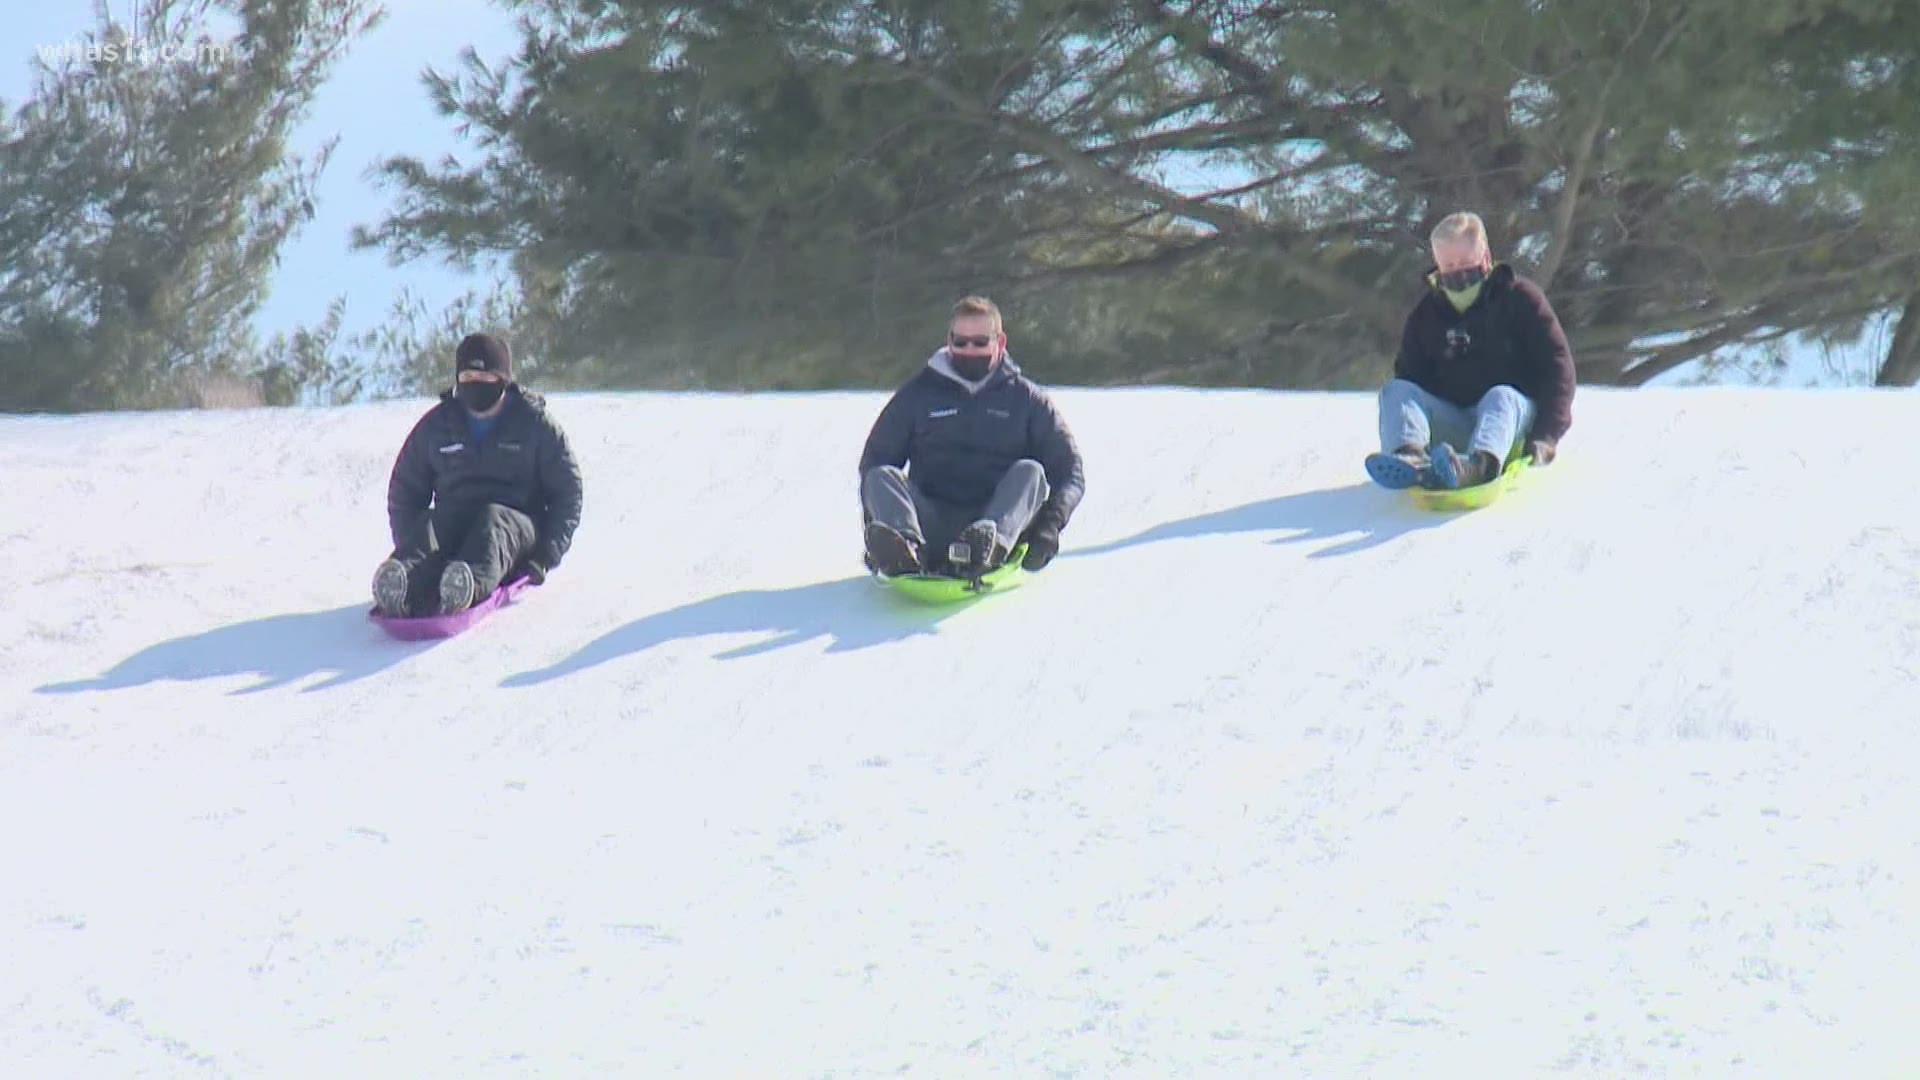 WHAS11 NightTeam members Doug Proffitt, Ben Pine and Kent Spencer took the challenge of sledding down the biggest hill at Cherokee Park.